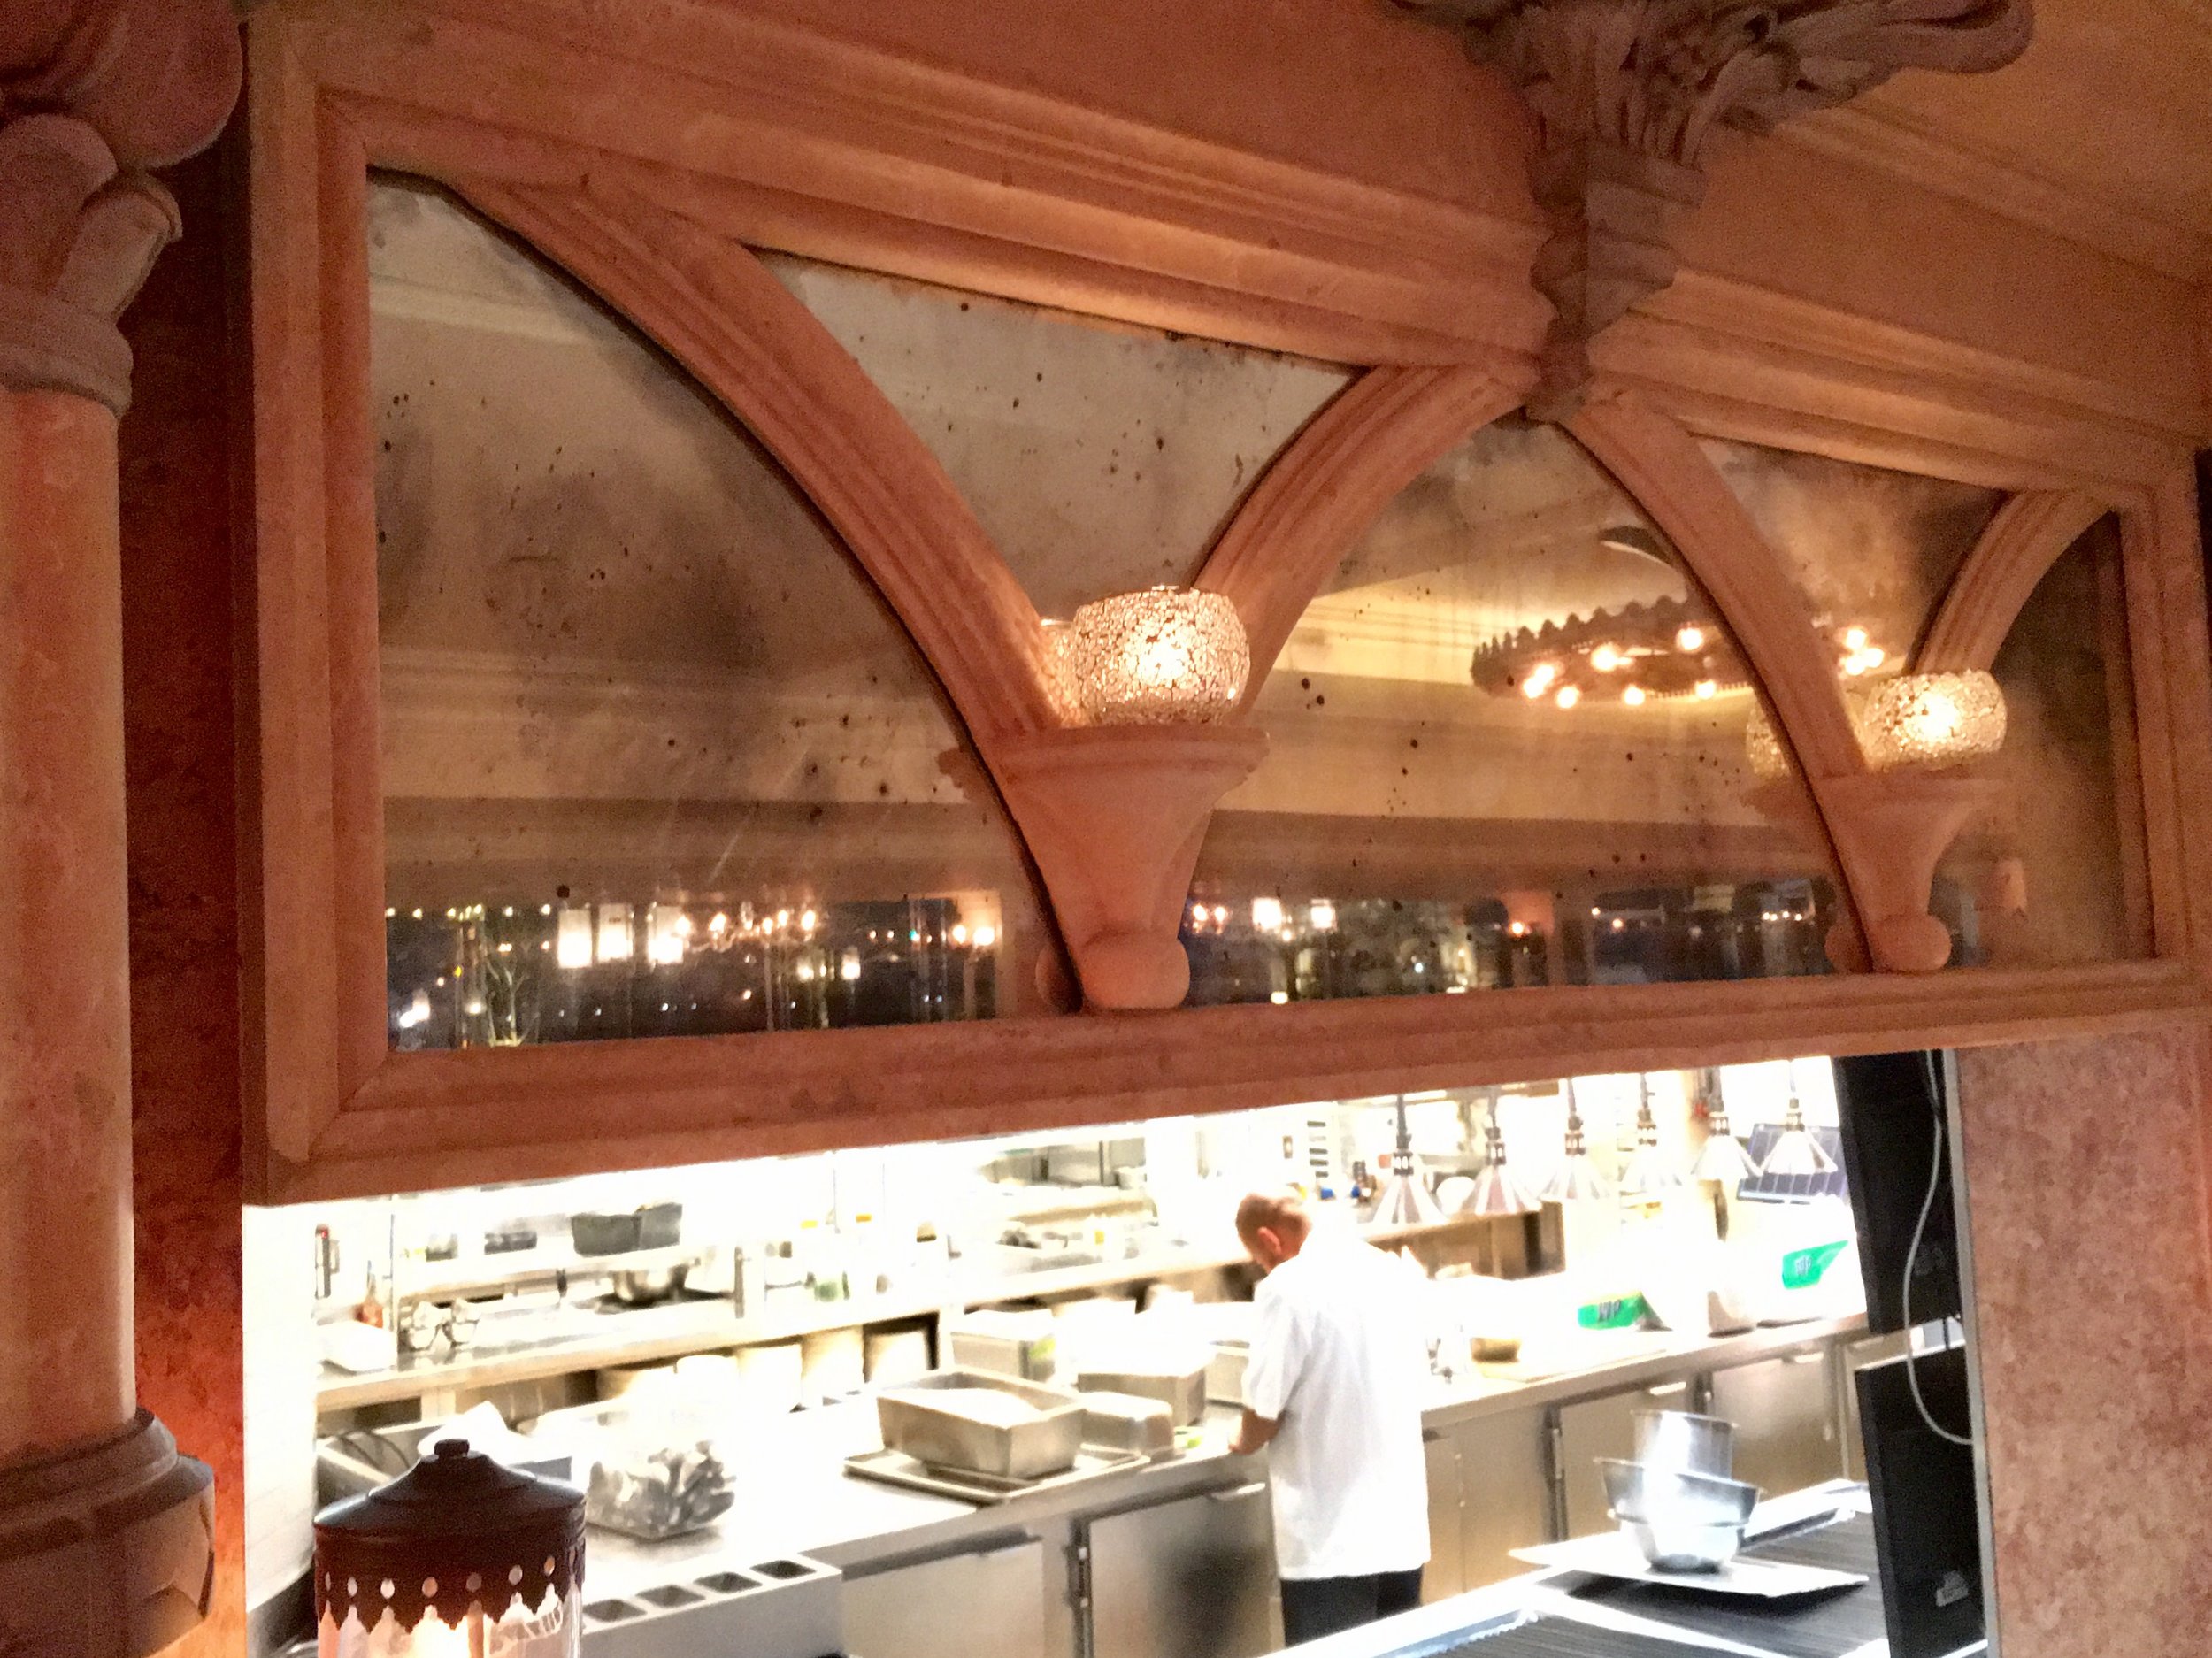 Handsilvered mirrors above open kitchen at Tavern on the Green Restaurant, NYC